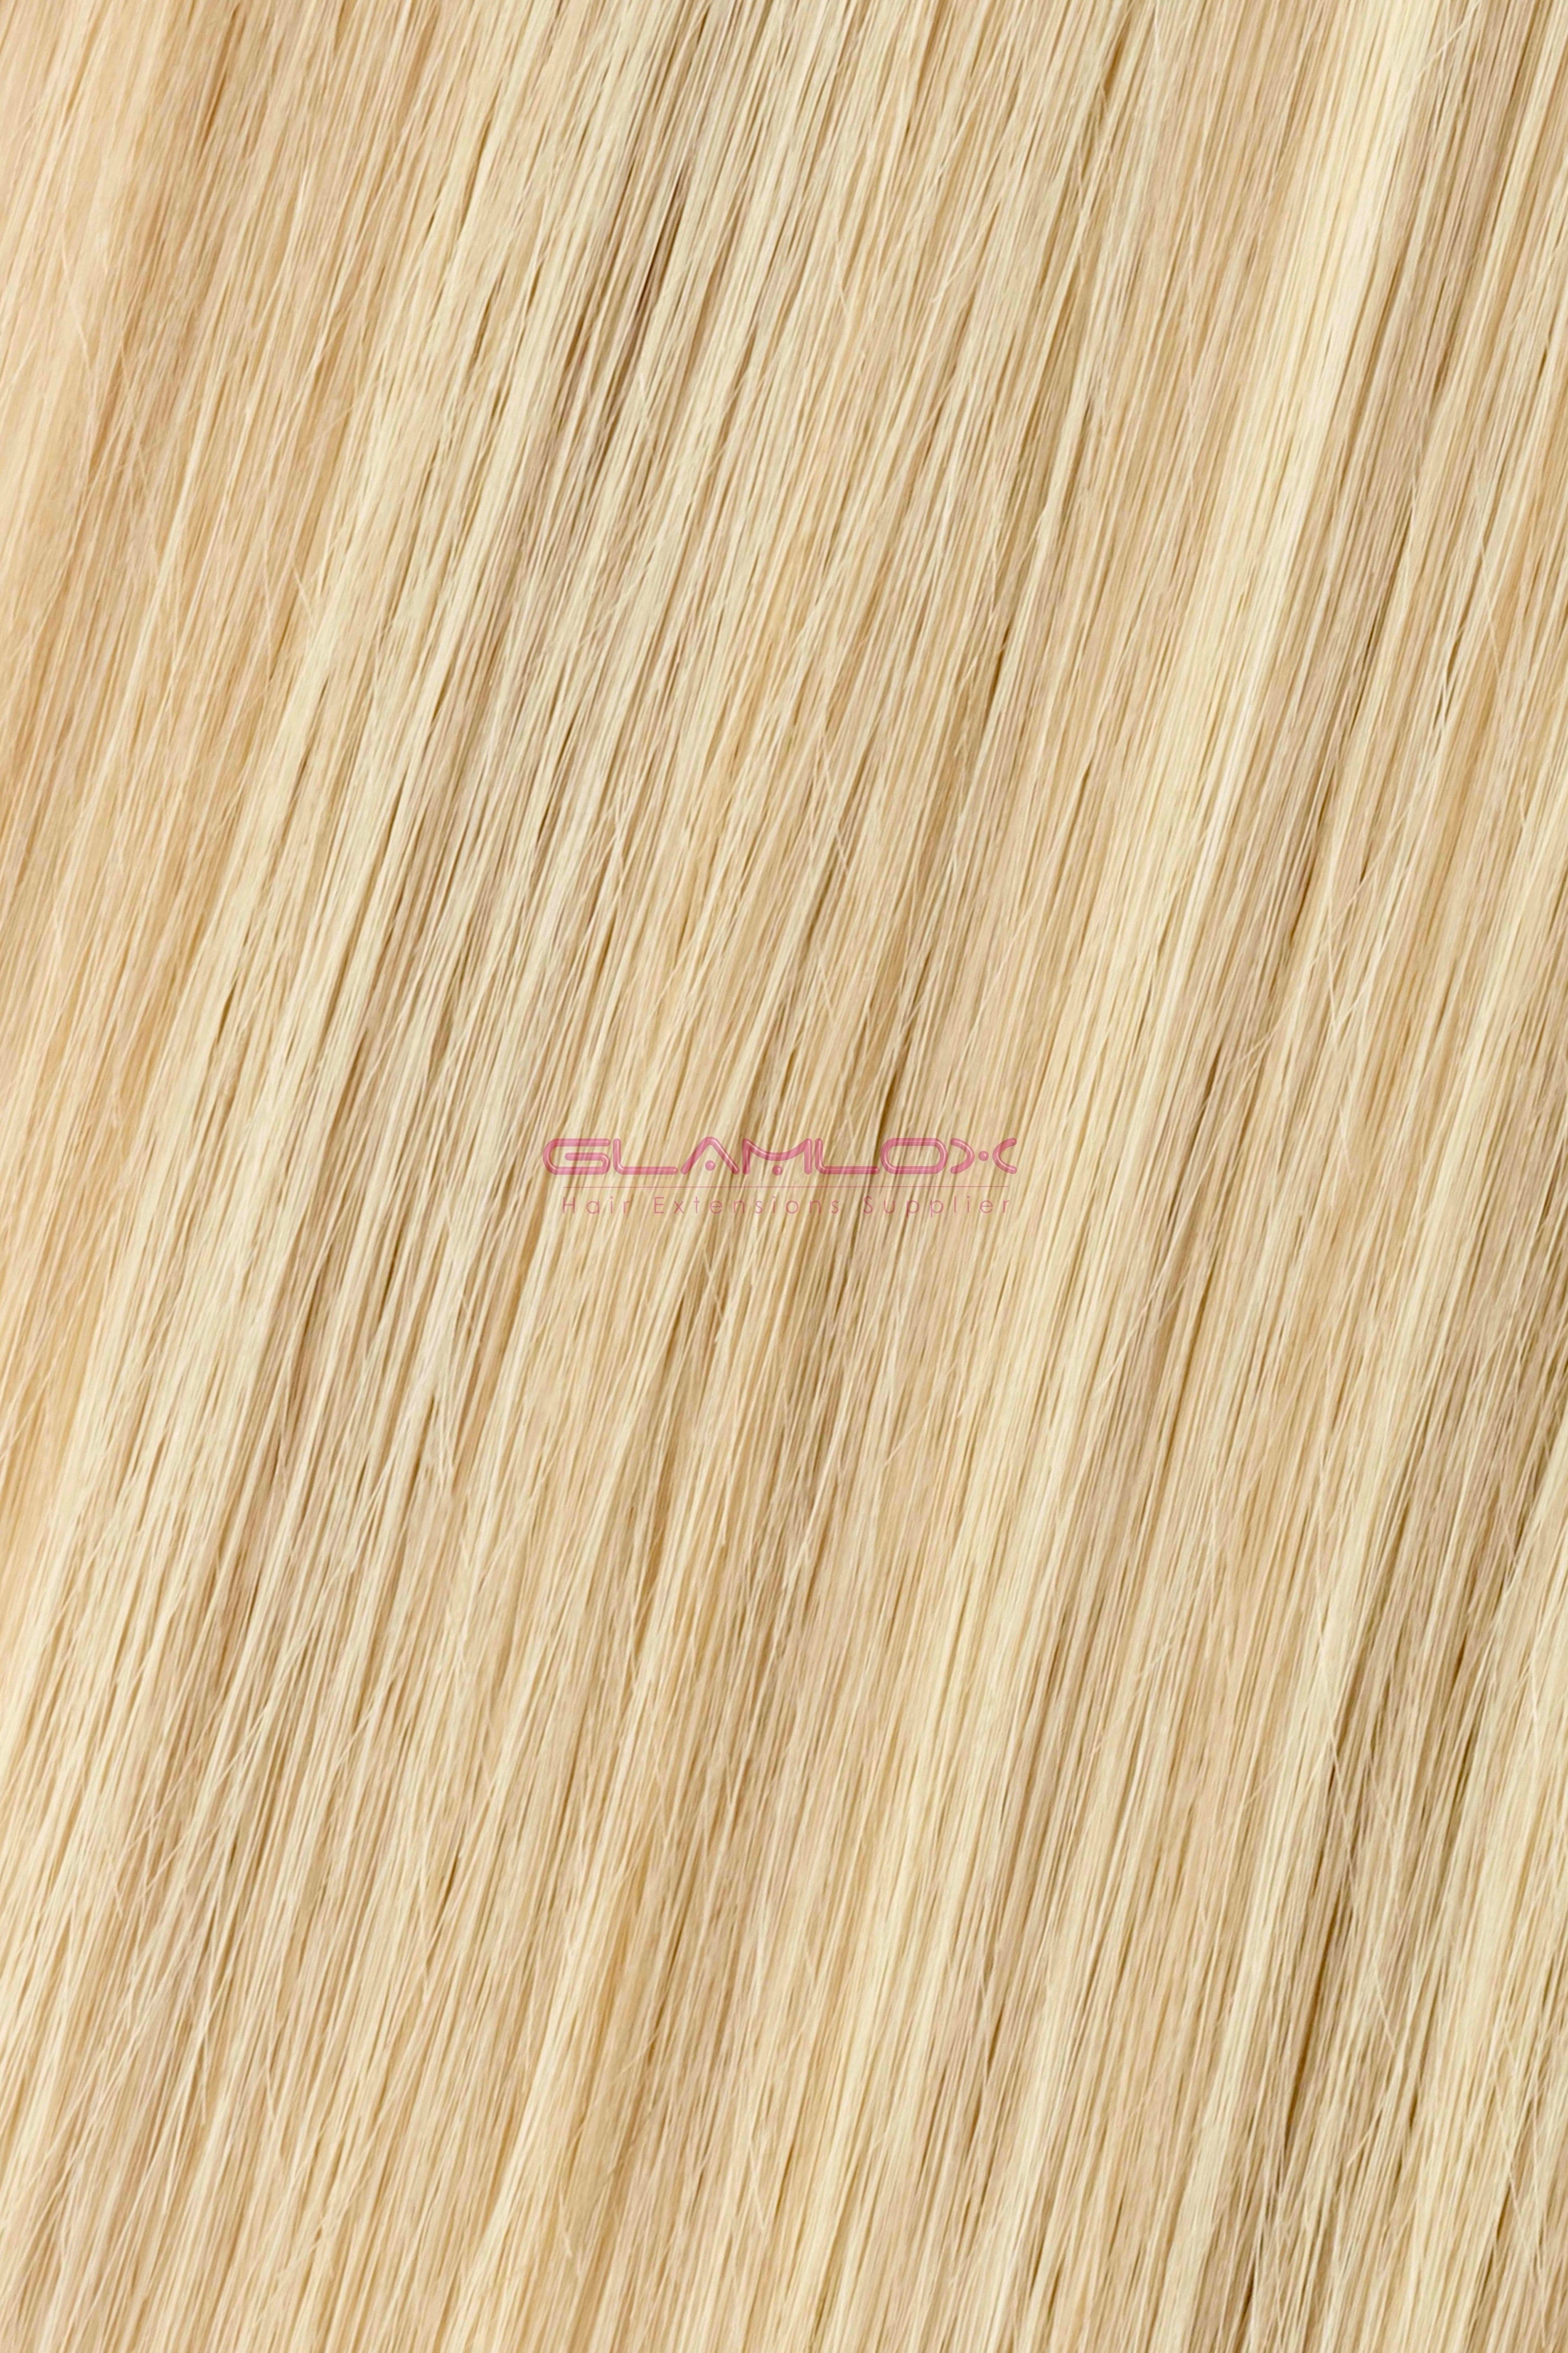 14" Nano Ring Hair Extensions - Russian Mongolian Double Drawn Remy Human Hair - 100 Strands